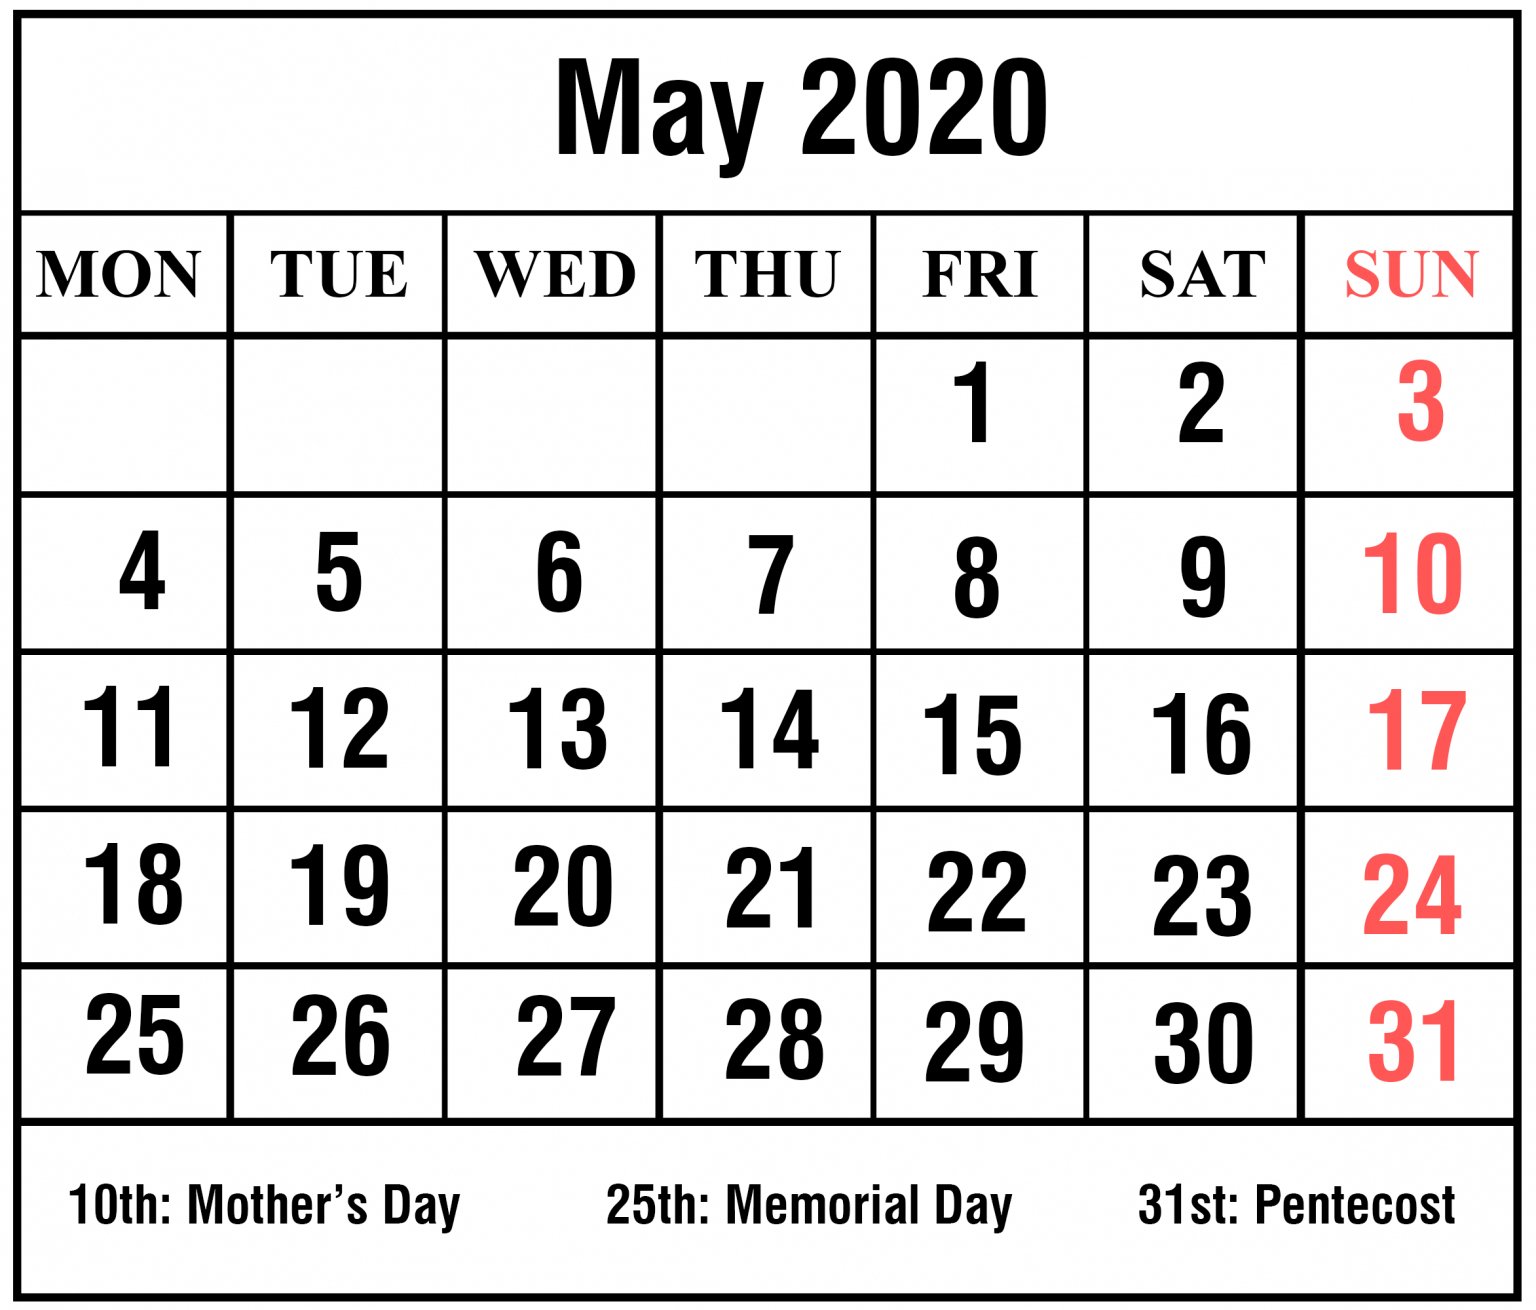 Printable May 2020 Calendar For Daily, Weekly, Monthly